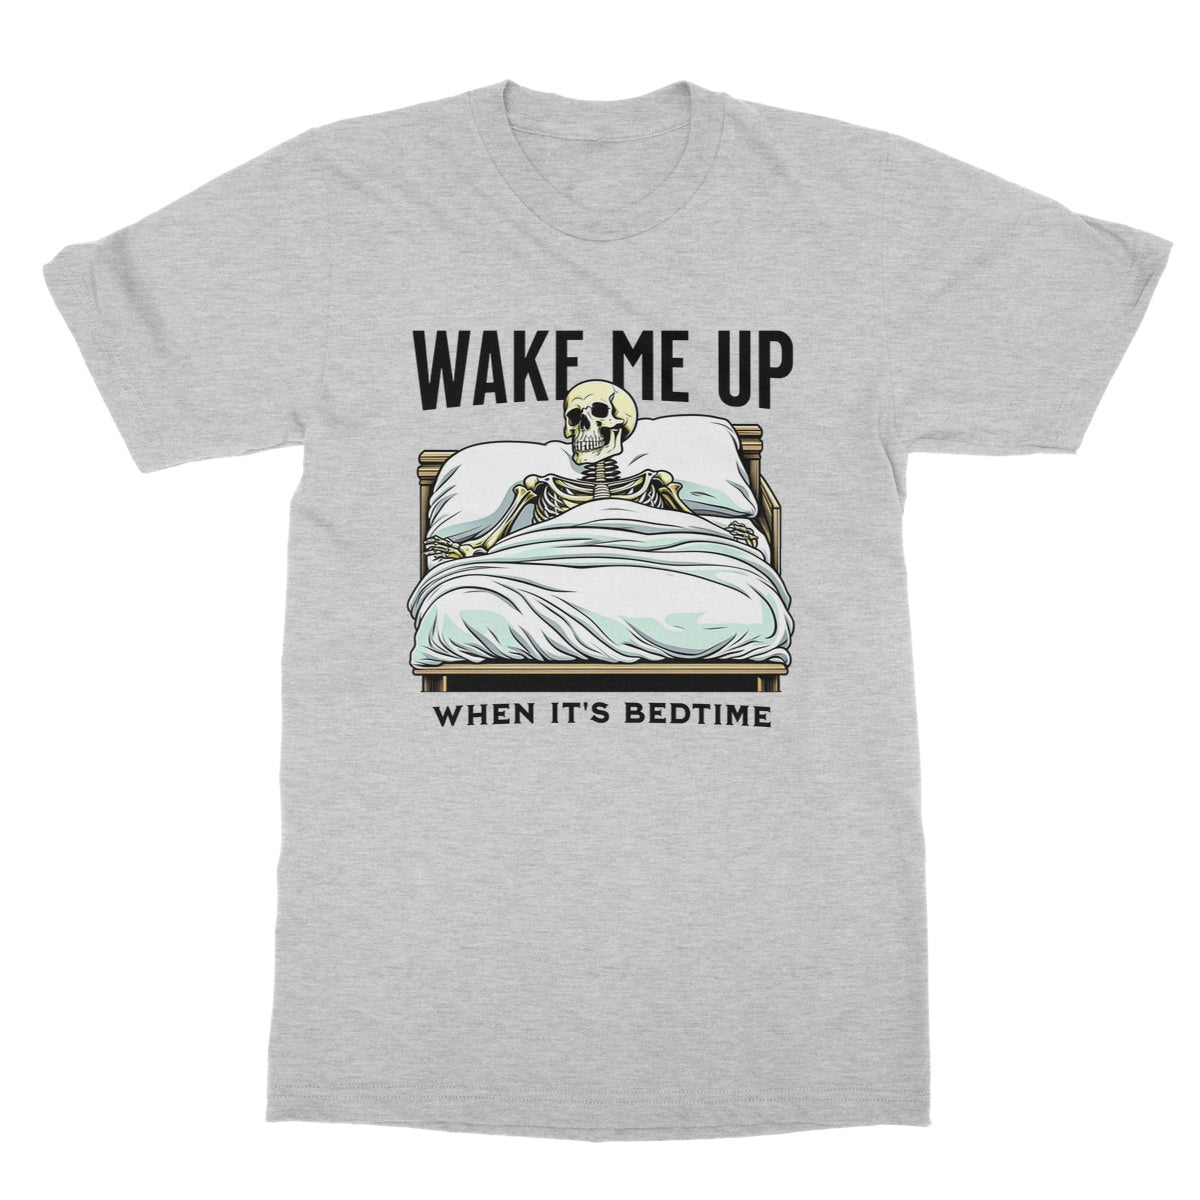 wake me up when it is bedtime t shirt grey